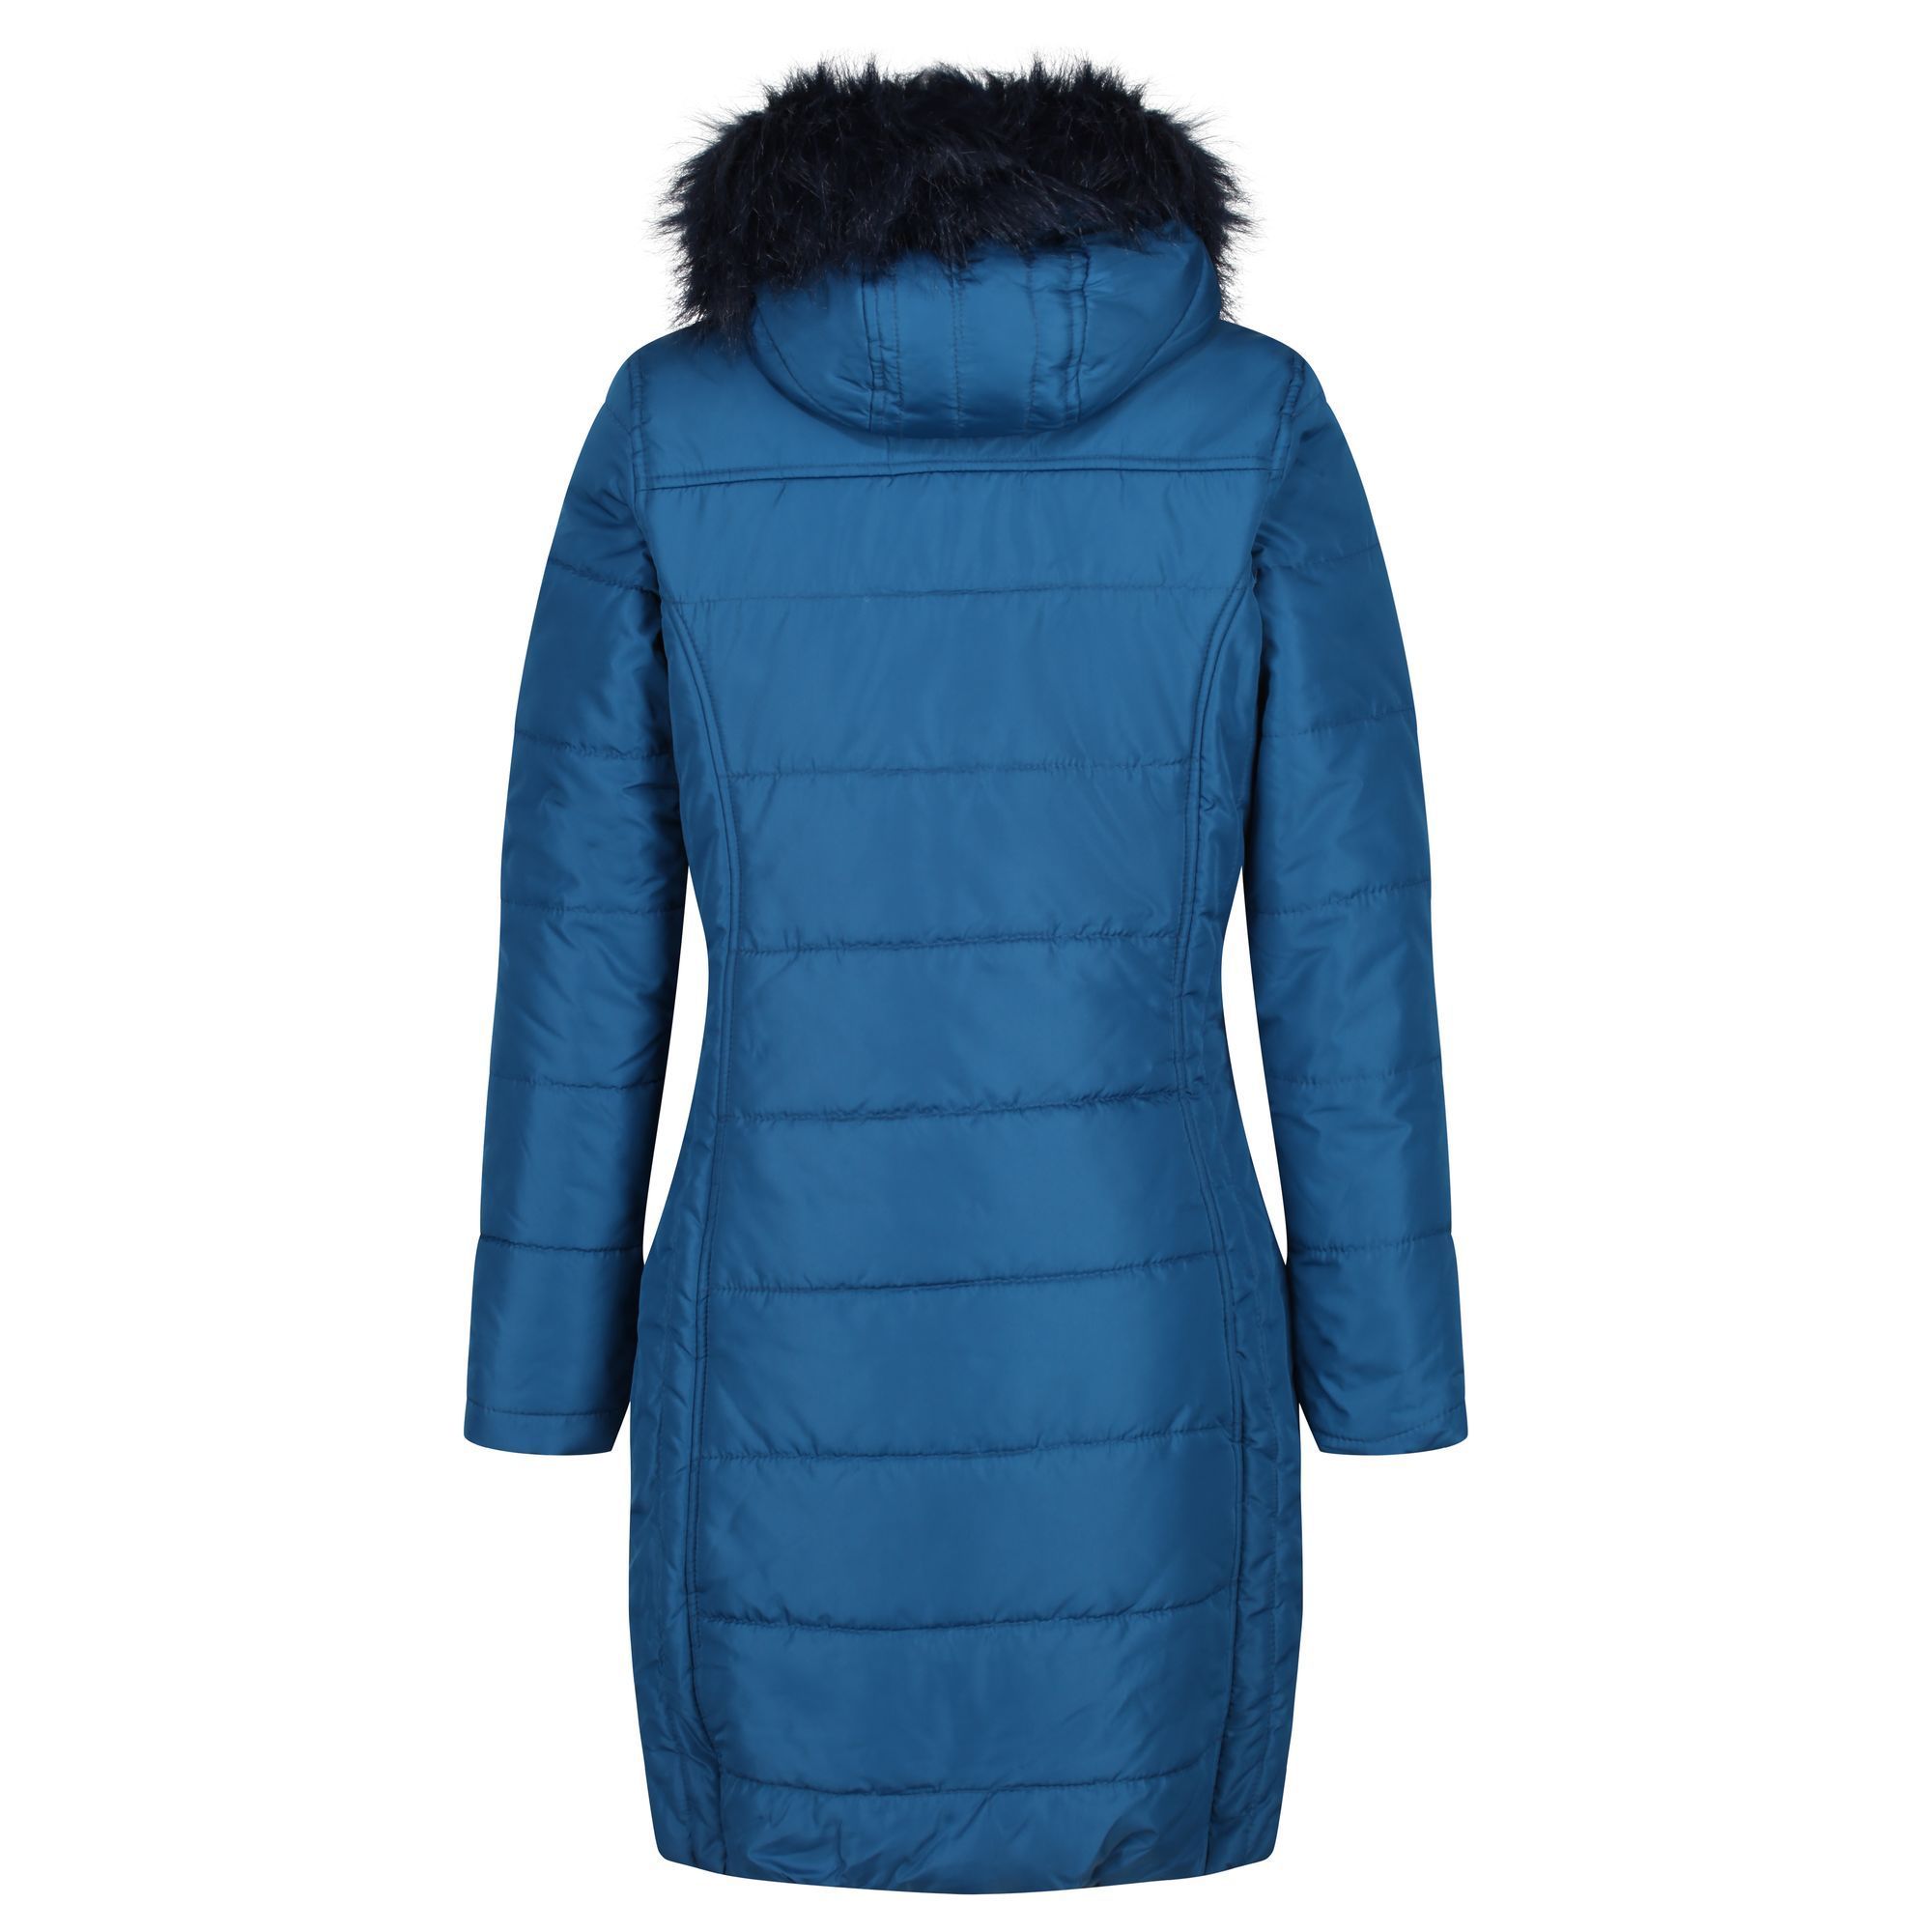 100% Polyester. Quilted water repellent polyester micro poplin. Thermo-Guard insulation. Polyester taffeta lined. Internal security pocket. Grown on hood with detachable faux fur trim.